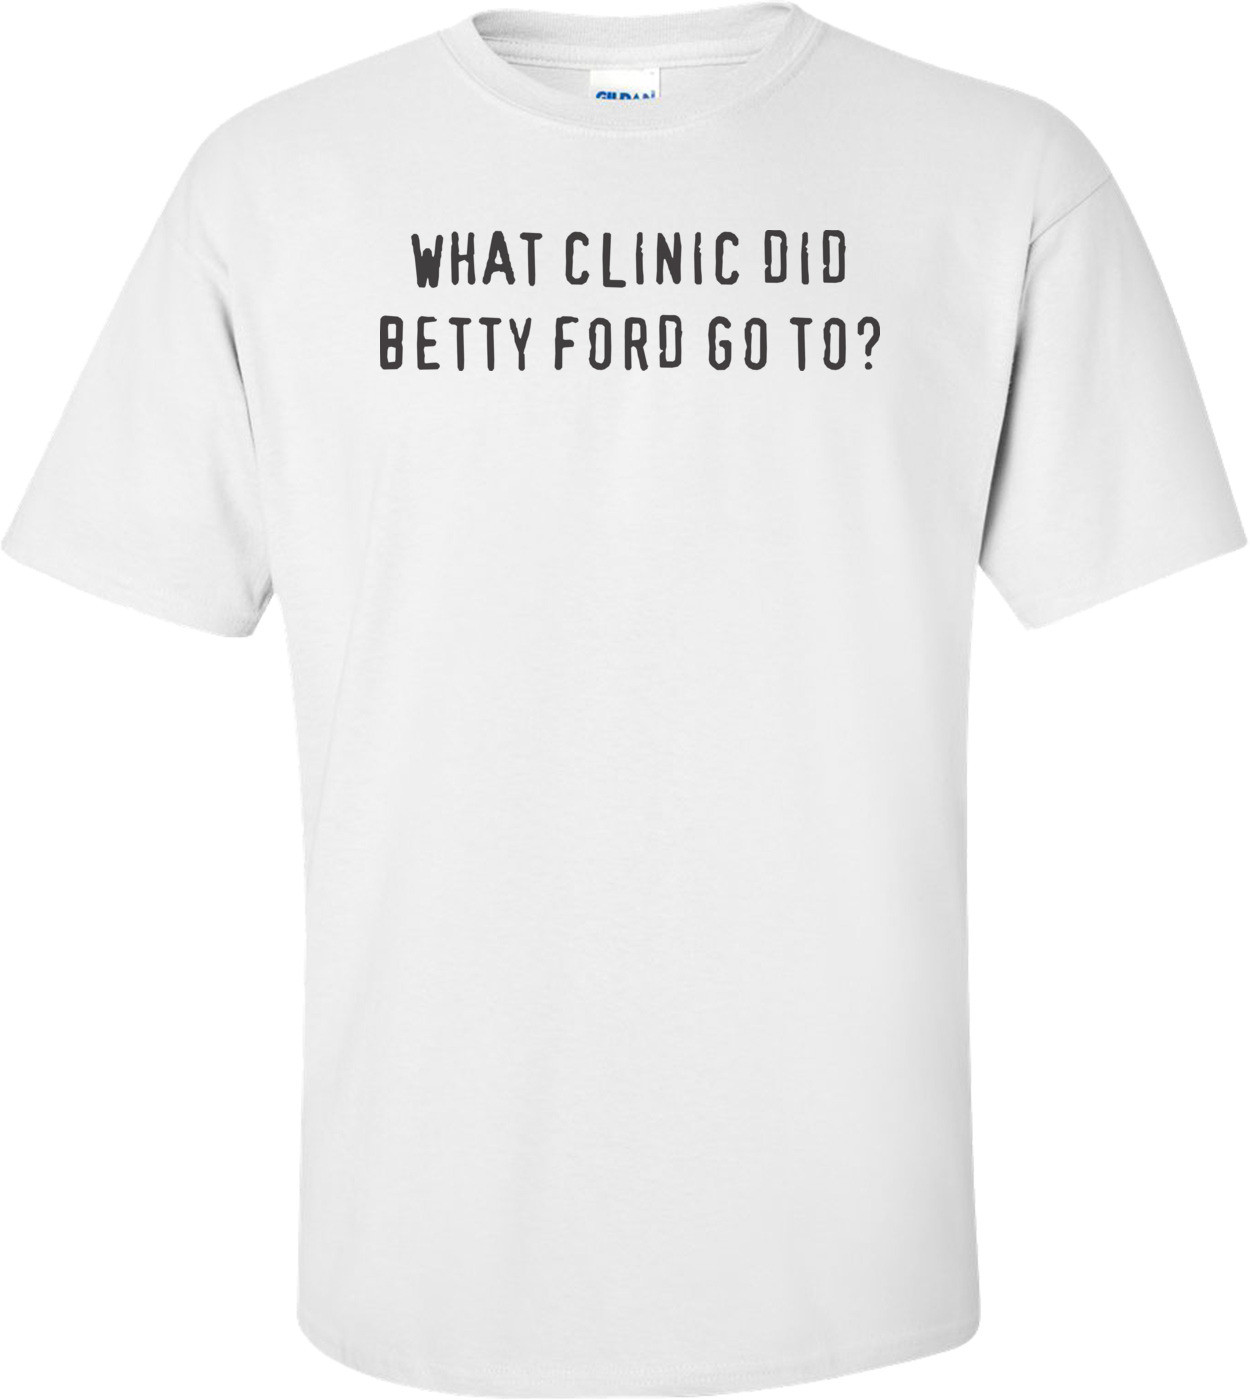 What Clinic Did Betty Ford Go To? T-shirt